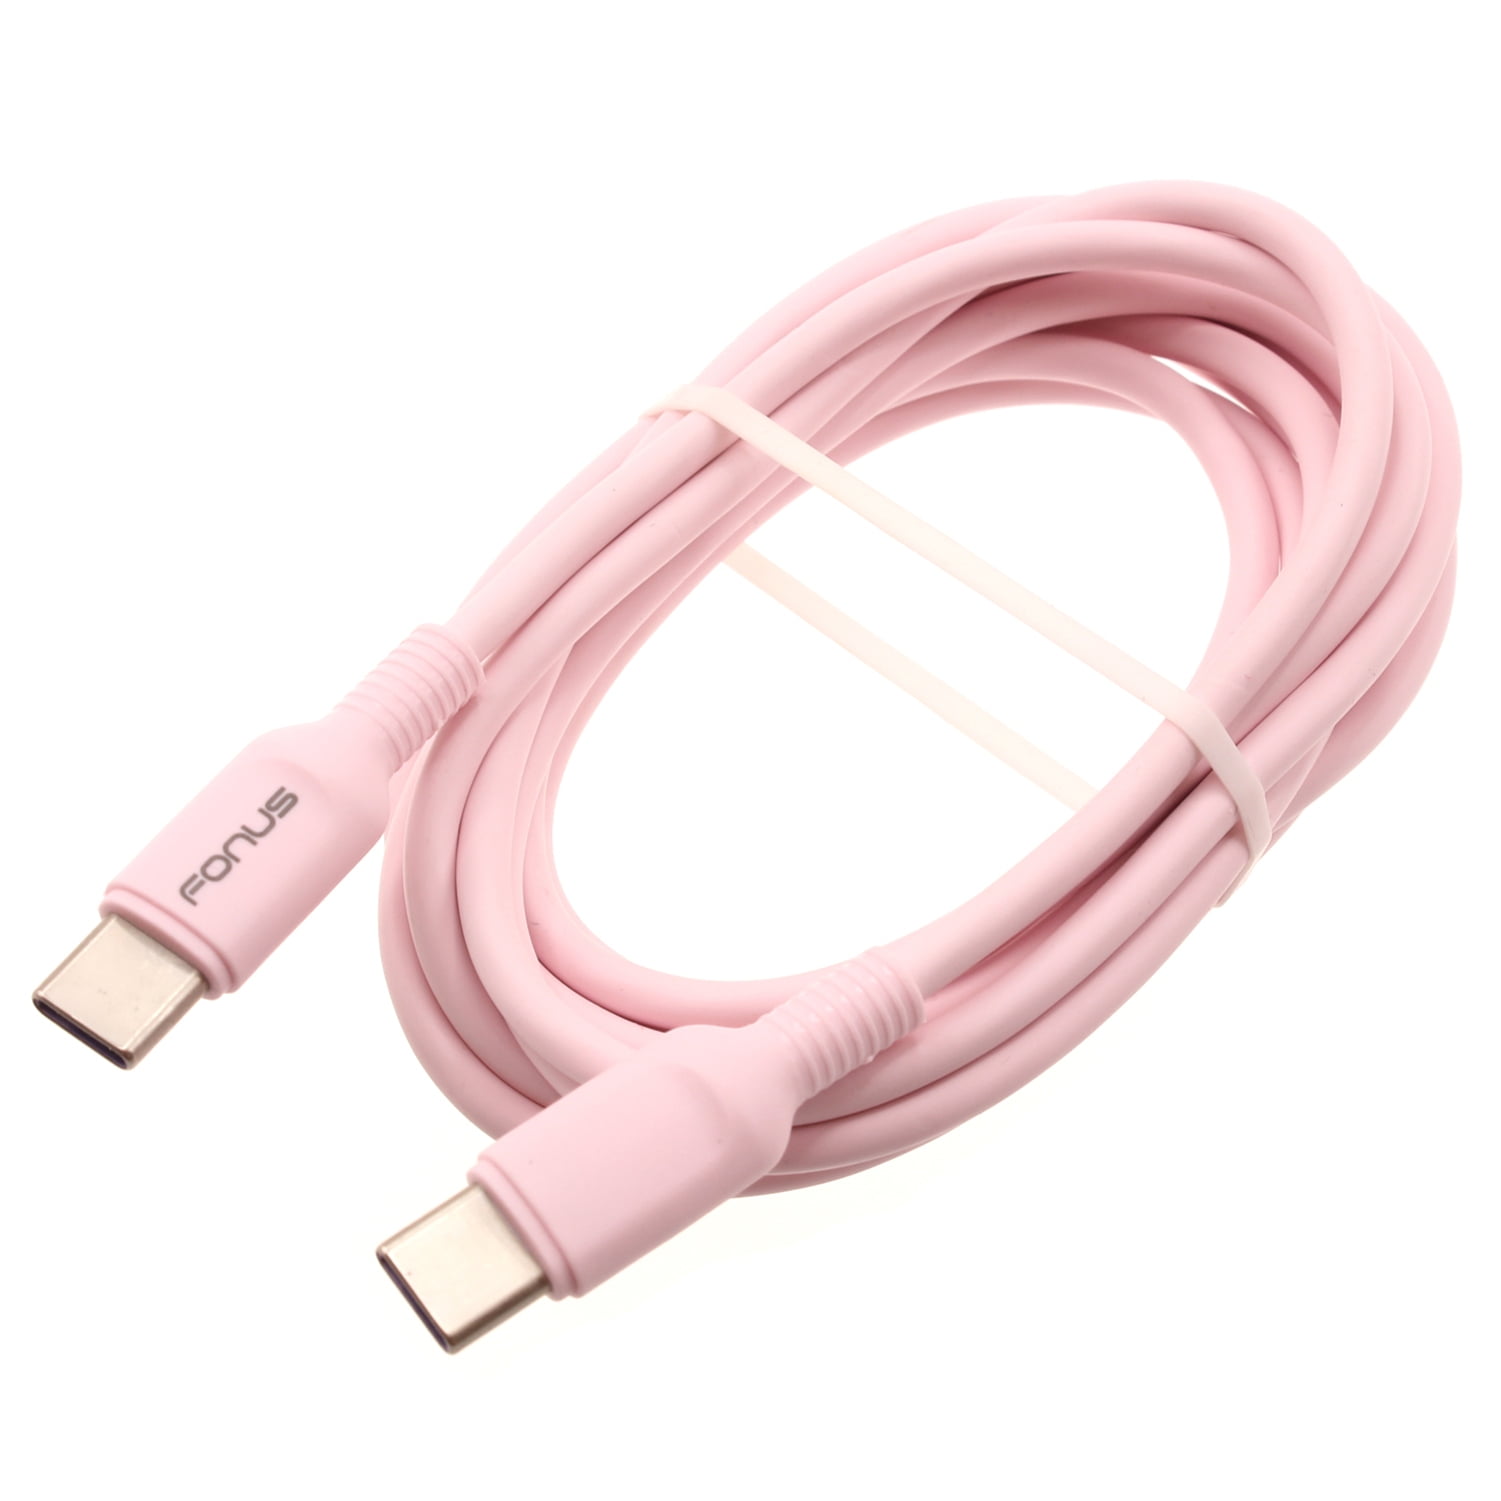 Expansion Complain Autonomy Fast Charger USB-C to Type-C Pink 6ft PD Cable for ZTE Blade A3 Prime Max 3  2S, Warp 7, Nubia 11, Axon 7, Avid 916, 9 Pro Mini, 10 Models - [Cord